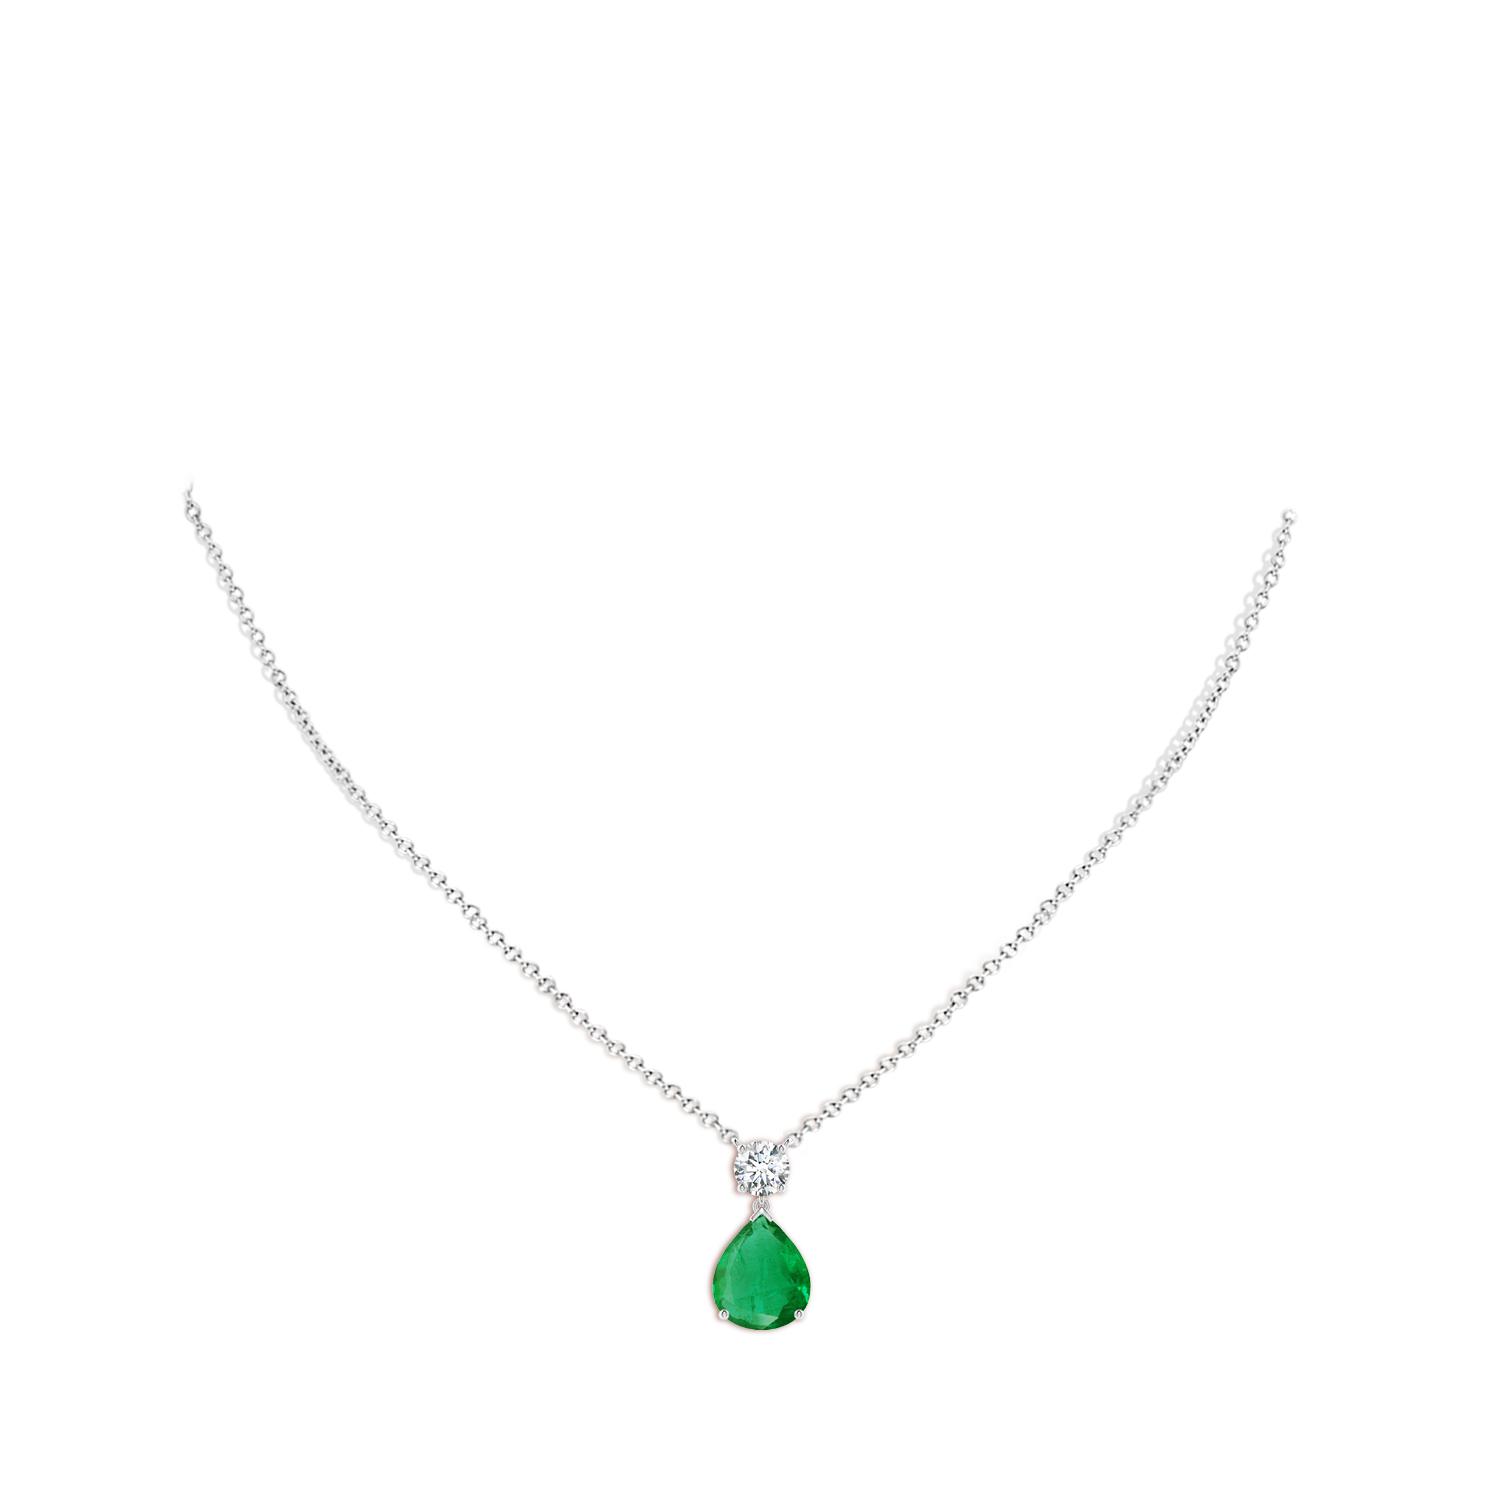 AA - Emerald / 5.21 CT / 18 KT White Gold